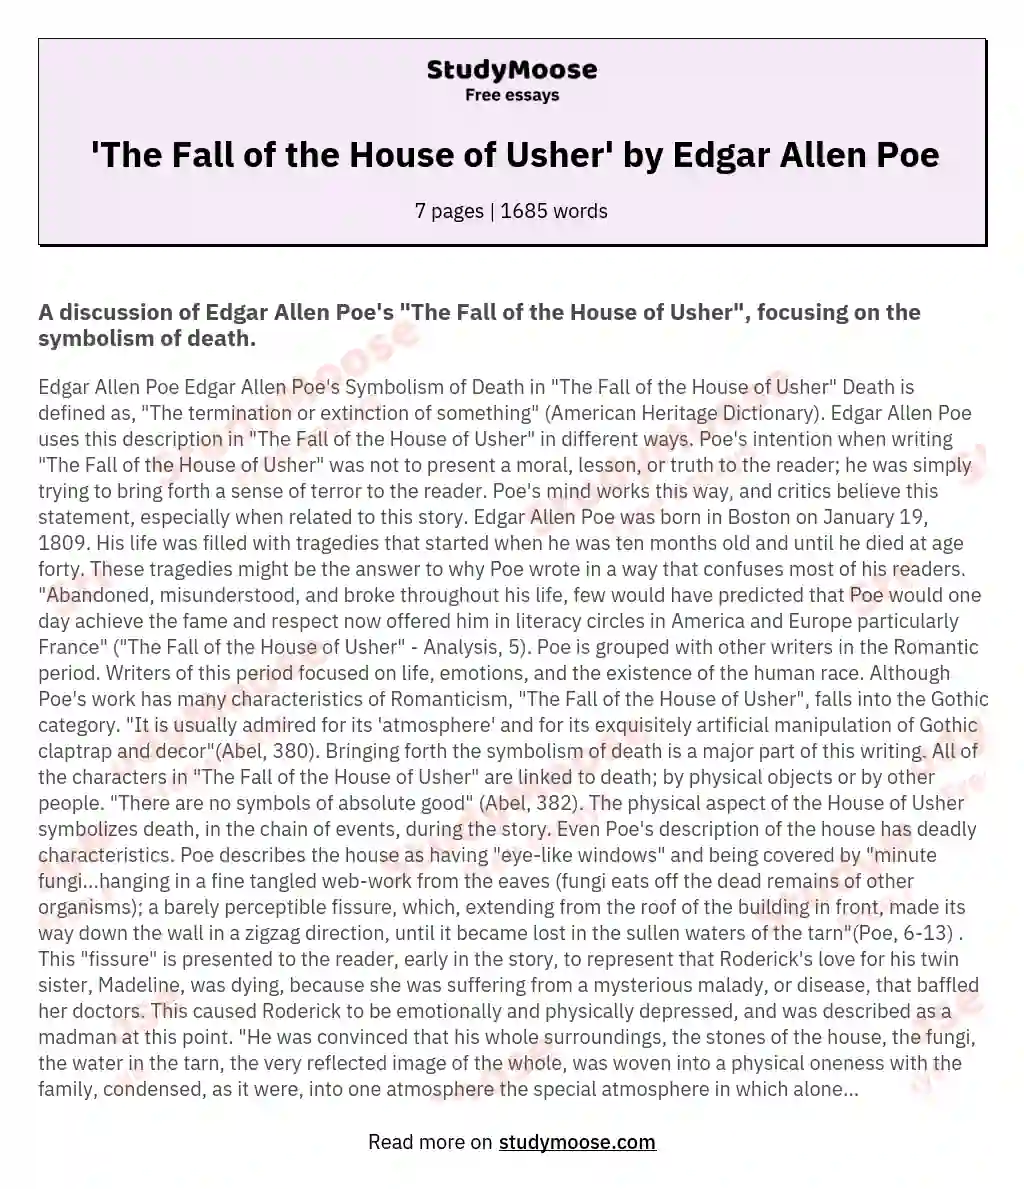 'The Fall of the House of Usher' by Edgar Allen Poe essay